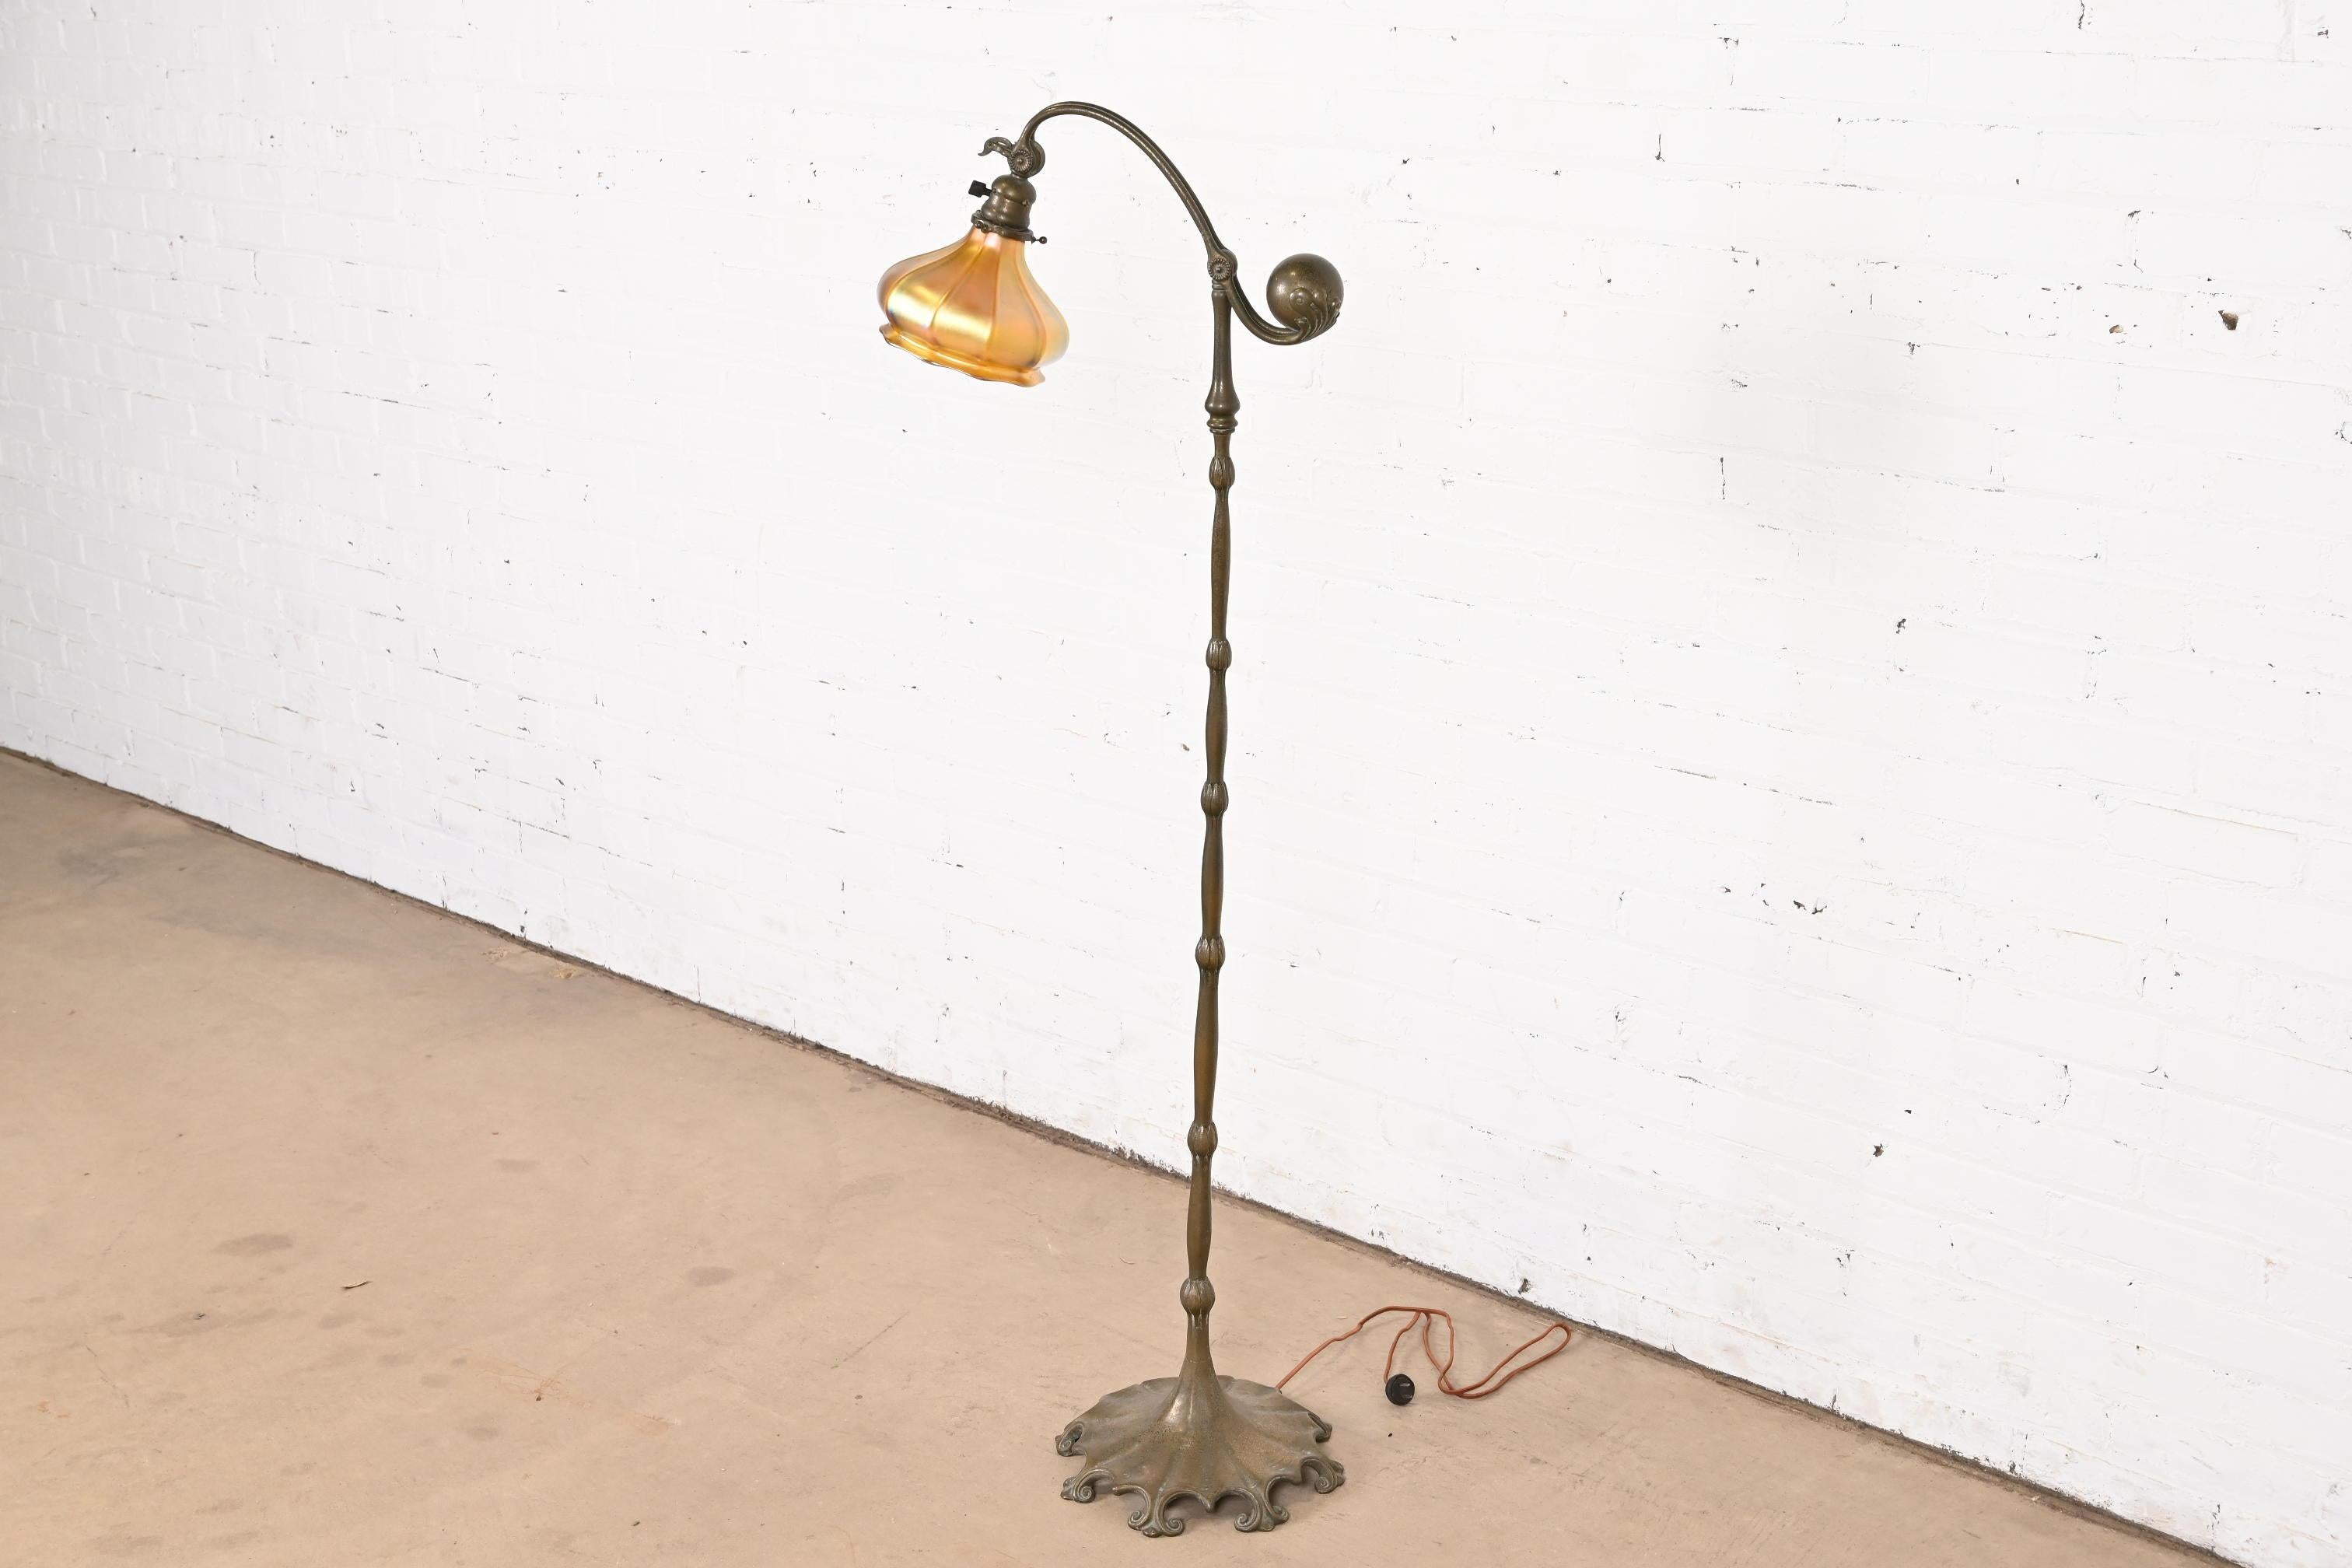 An outstanding Arts & Crafts or Art Deco period bronze counterbalance floor lamp 

By Tiffany Studios (signed under one foot)

New York, USA, Early 20th Century

Bronze stand, with gorgeous Quezal iridescent favrile glass shade.

Measures: 18